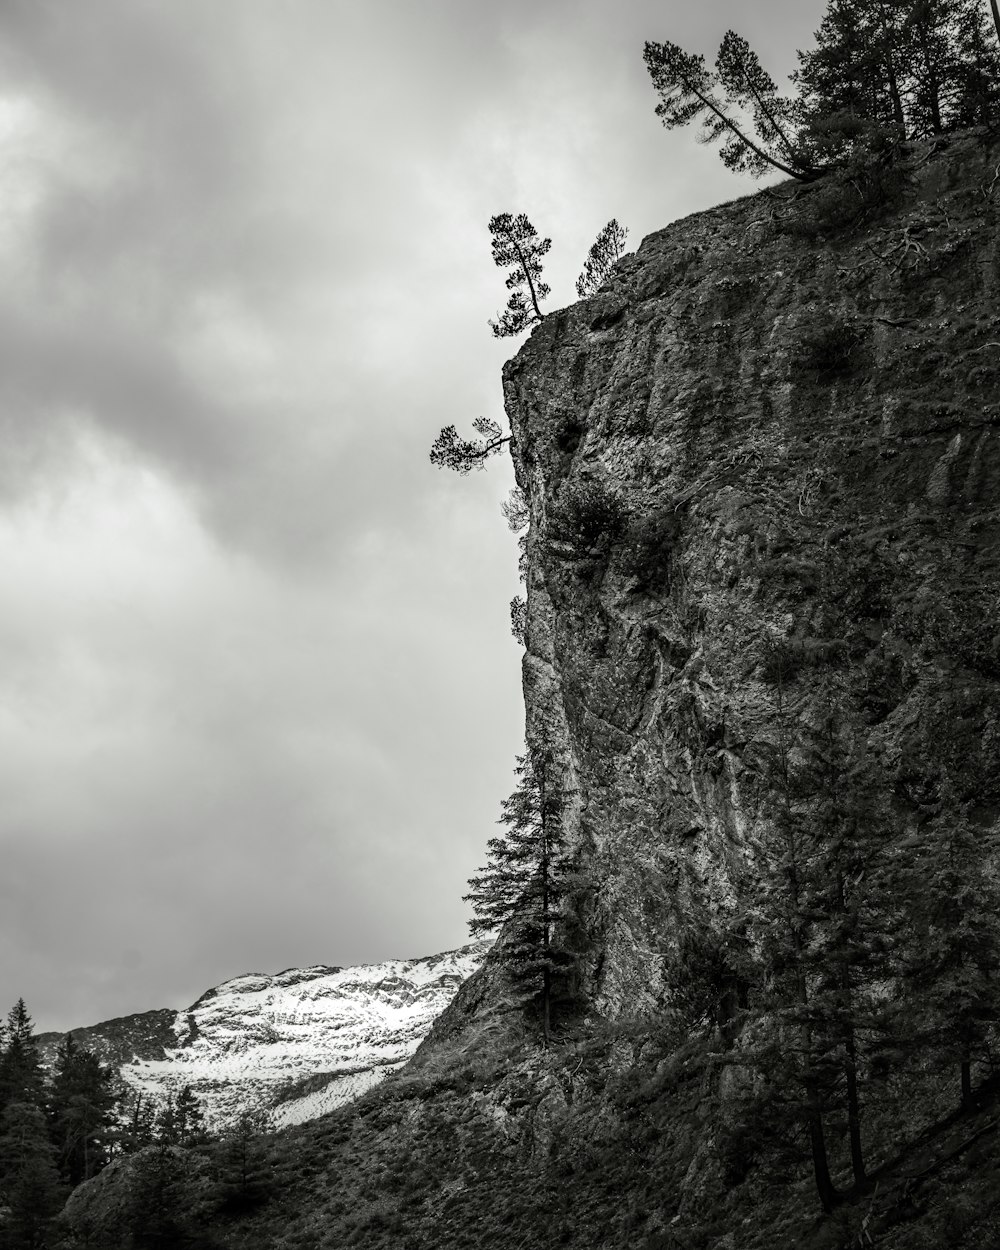 grayscale photo of person climbing on mountain